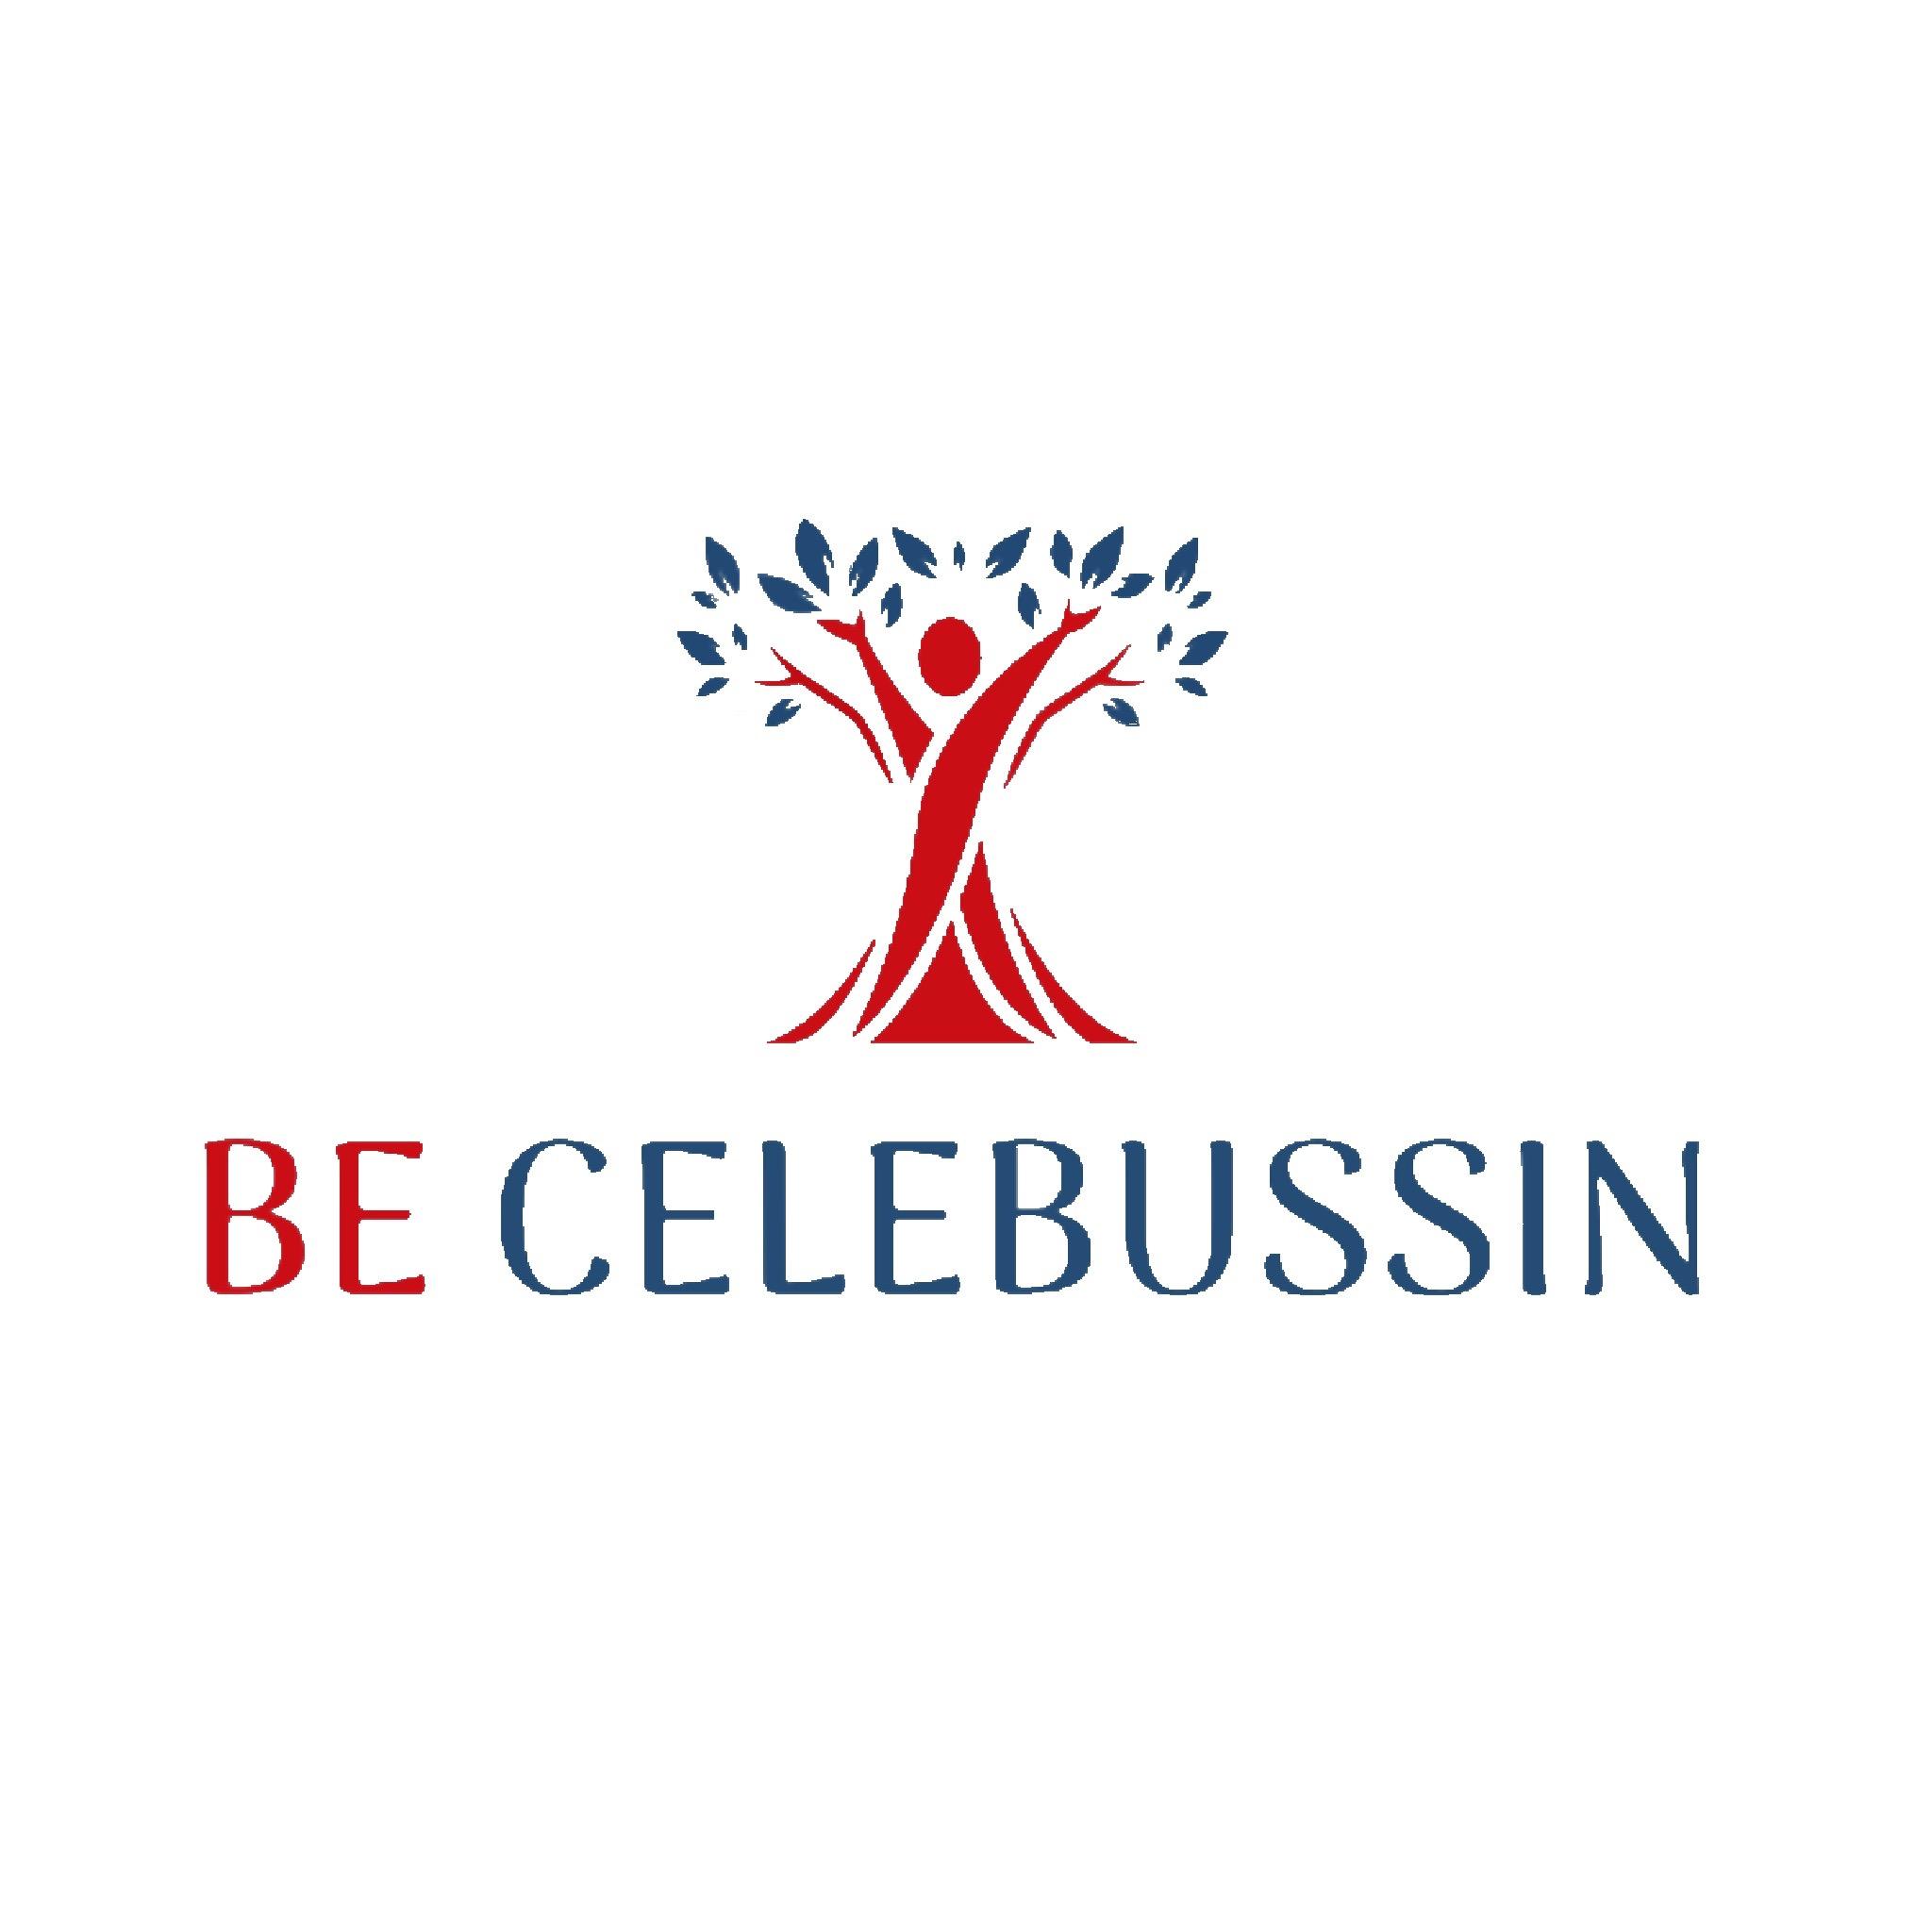 Be Celebussin